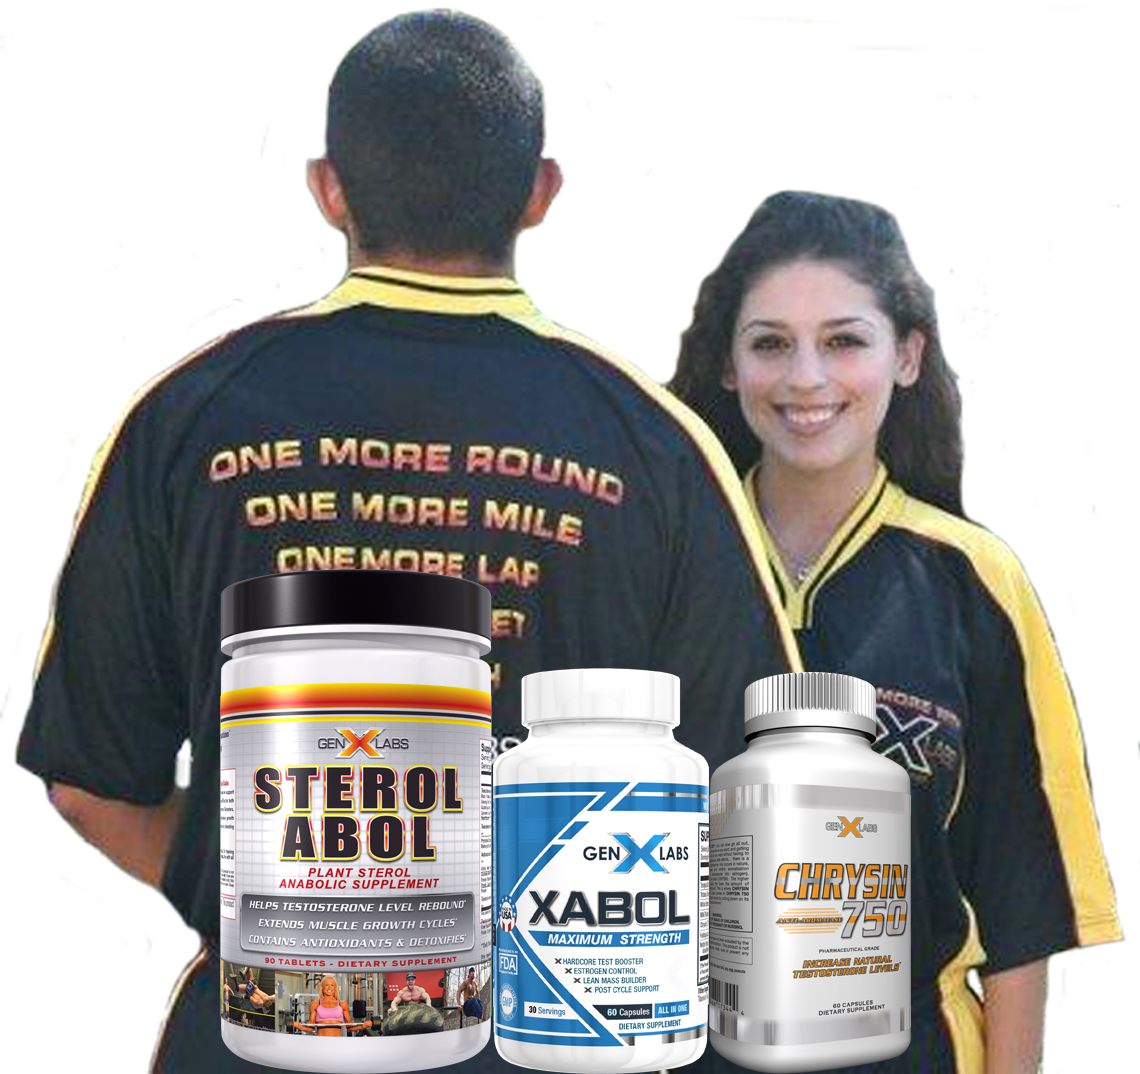 GenXLabs Cycle and Muscle Builder Stack FREE GenXLabs Training Set|Lowcostvitamin.com